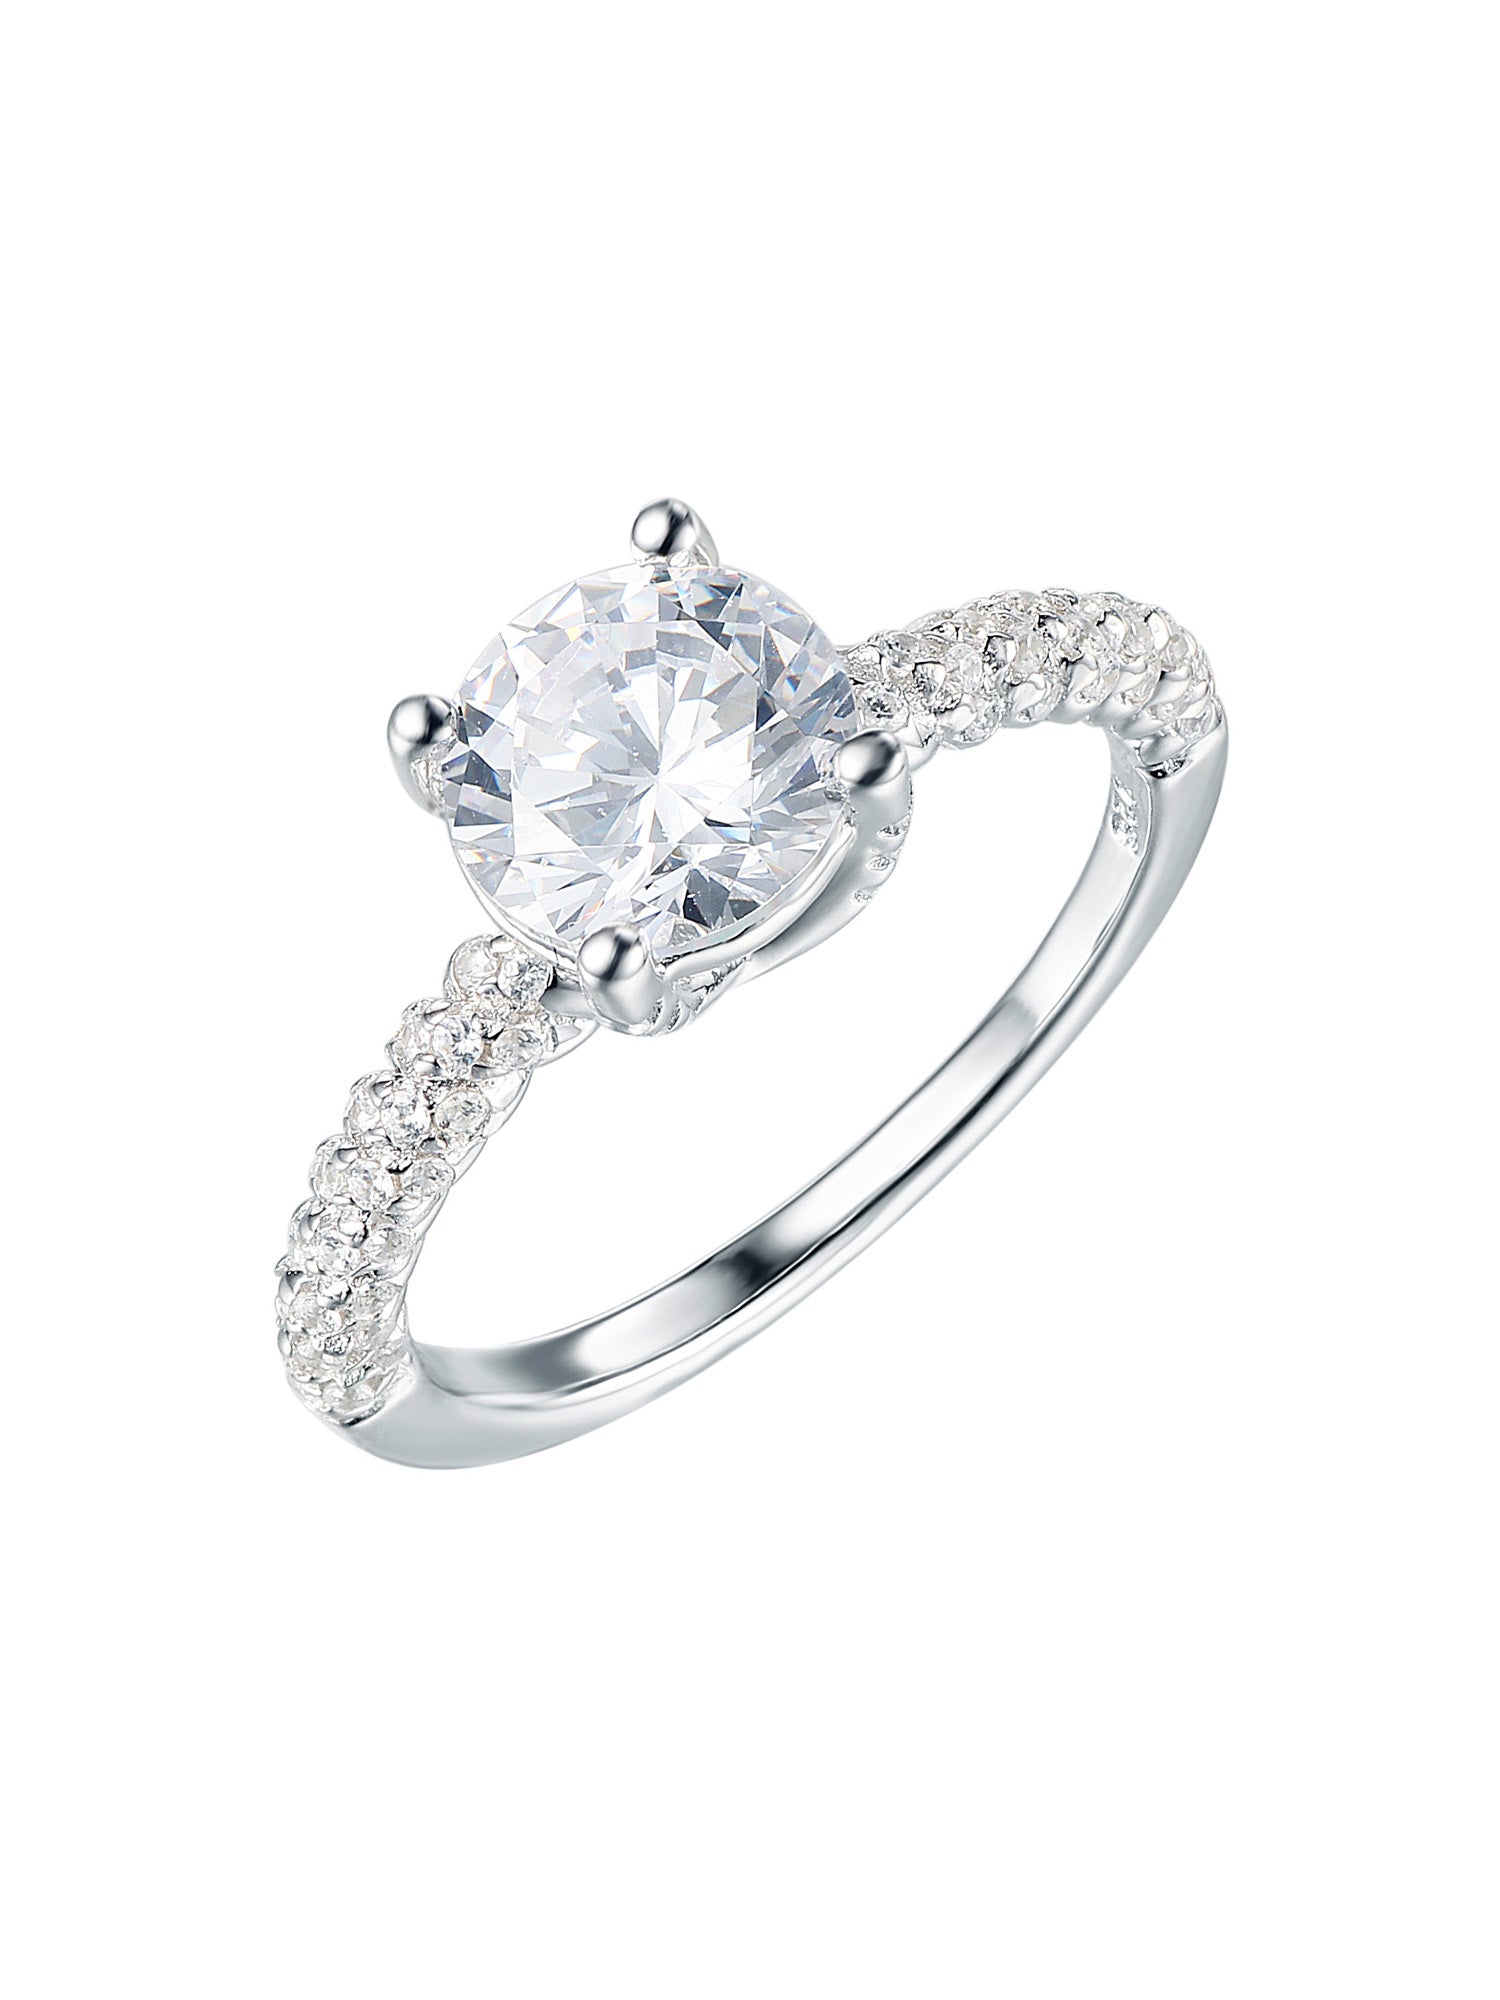 BUY 2 CARAT SOLITAIRE ENGAGEMENT RING